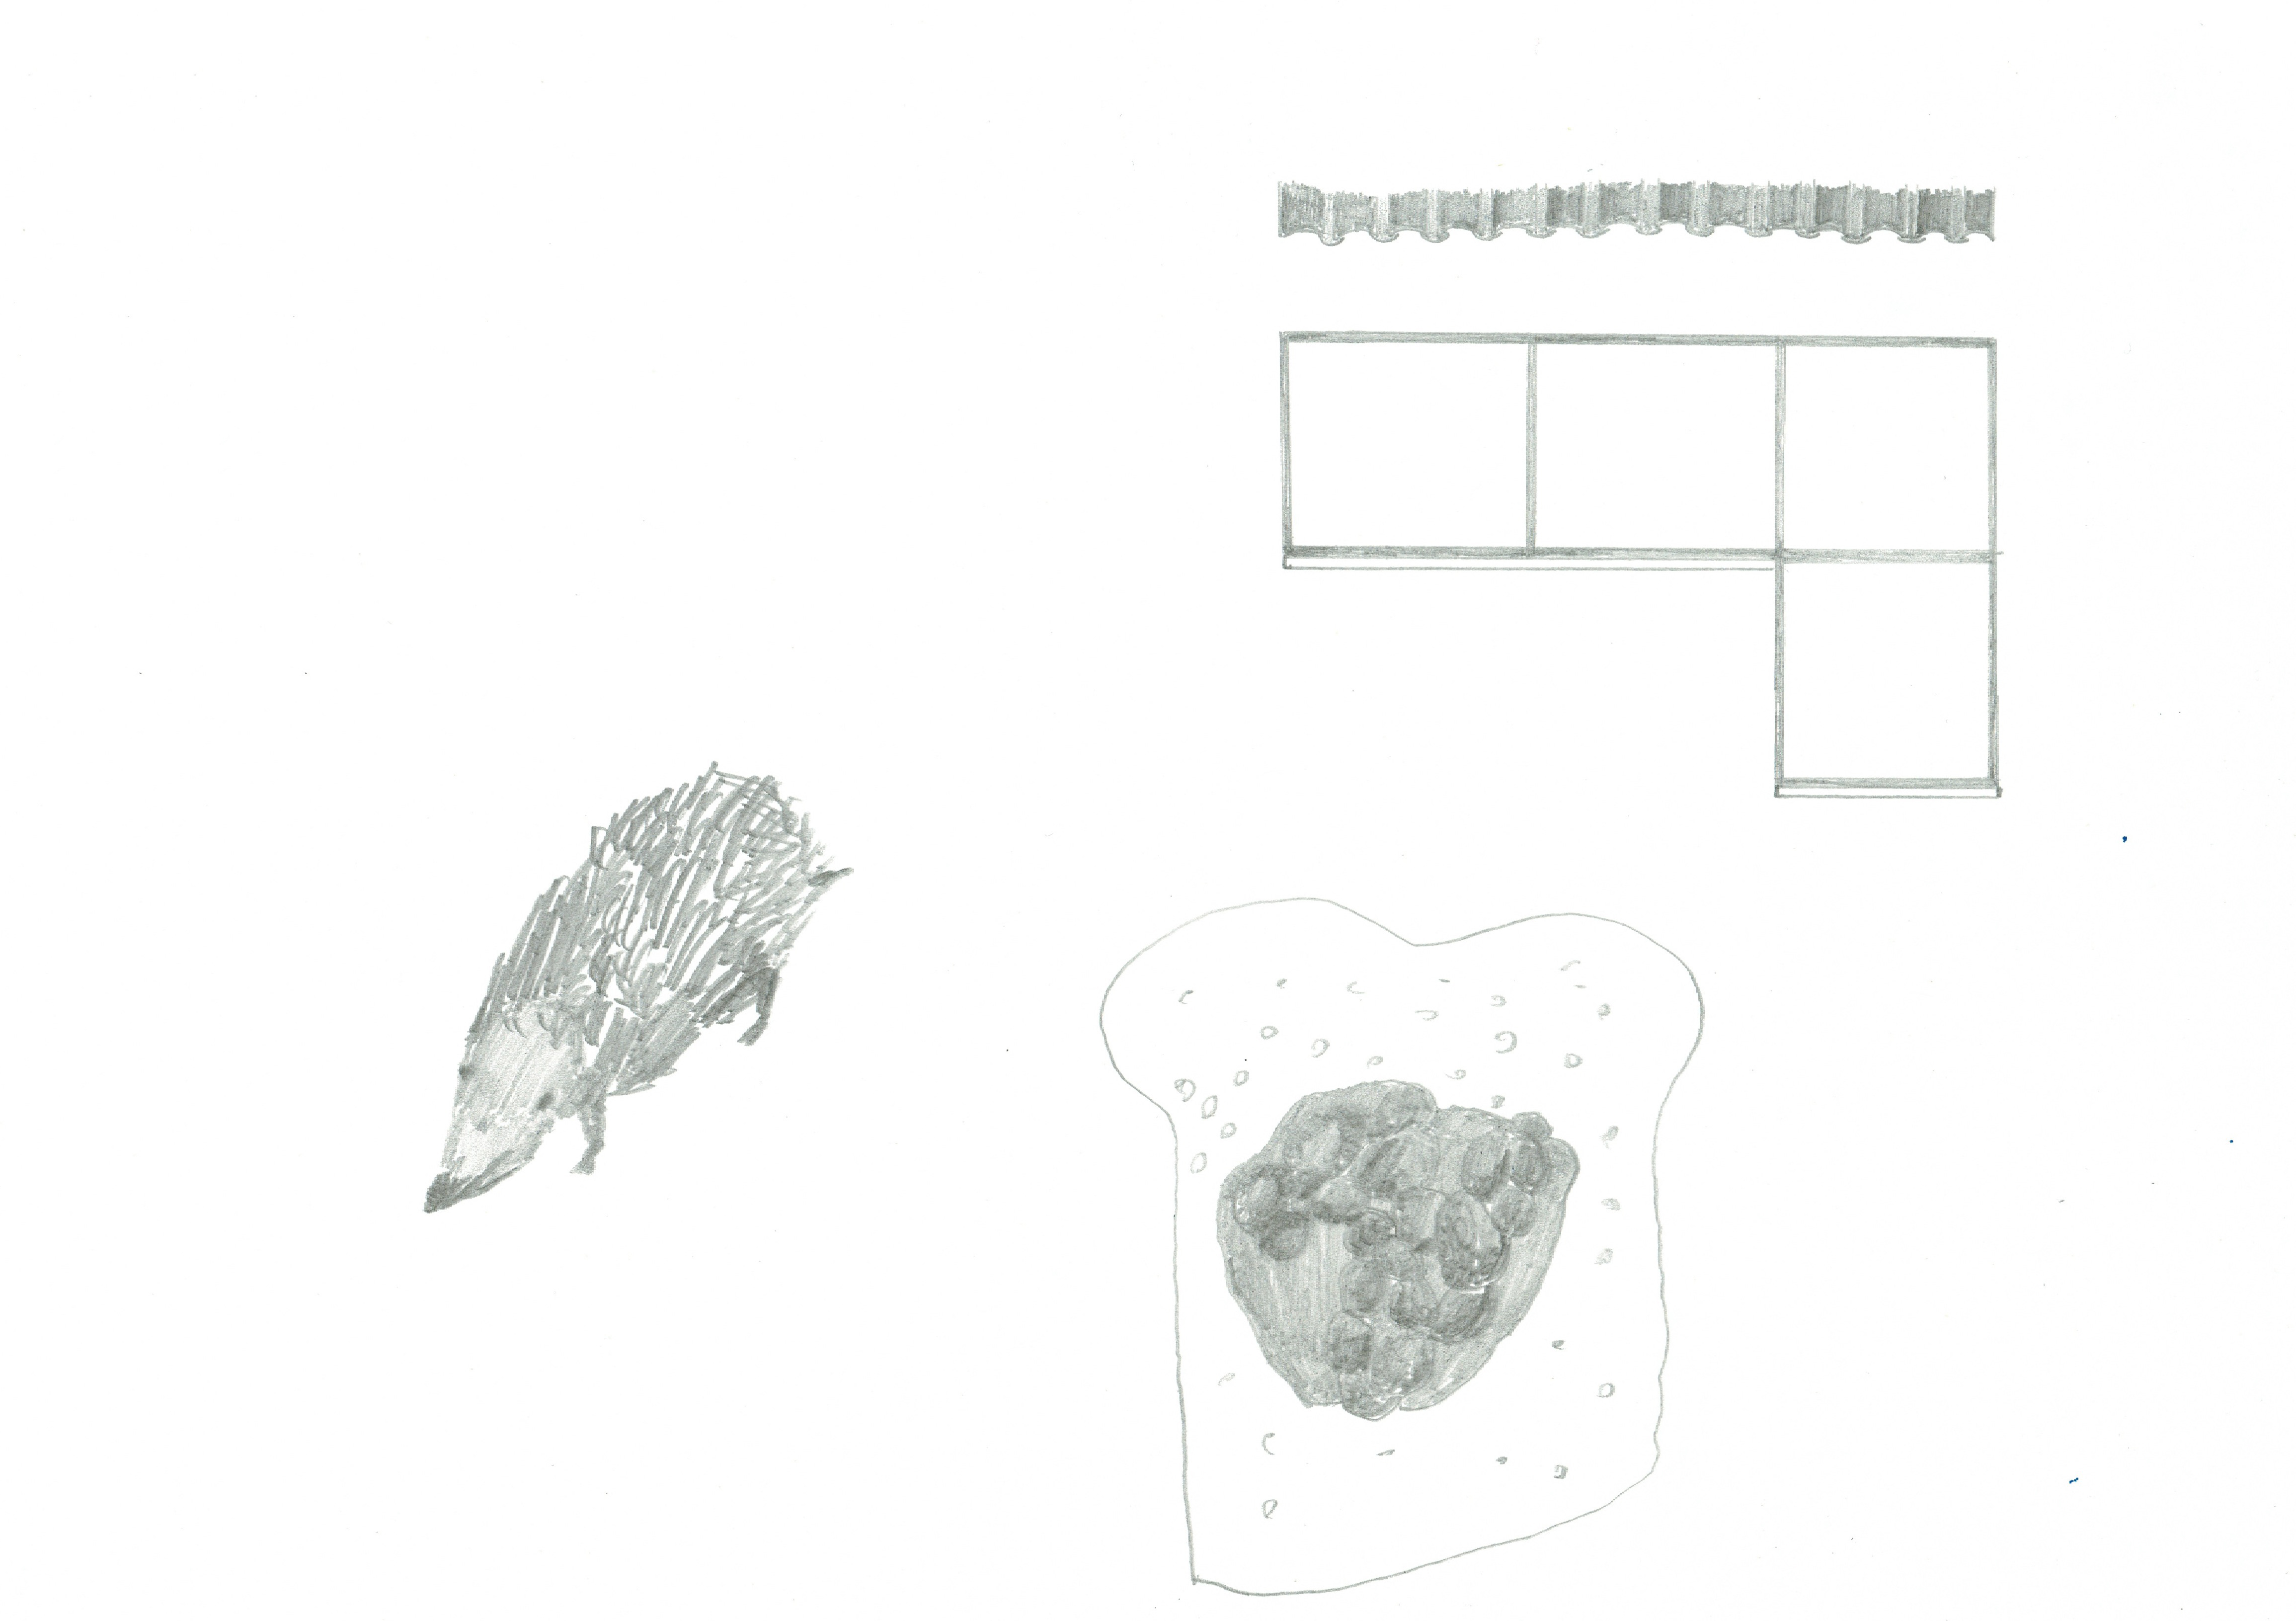 scattered drawings in pencil. one of a hedgehog on the left, beans on toast on the bottom, and four windows with roof overhang in top right